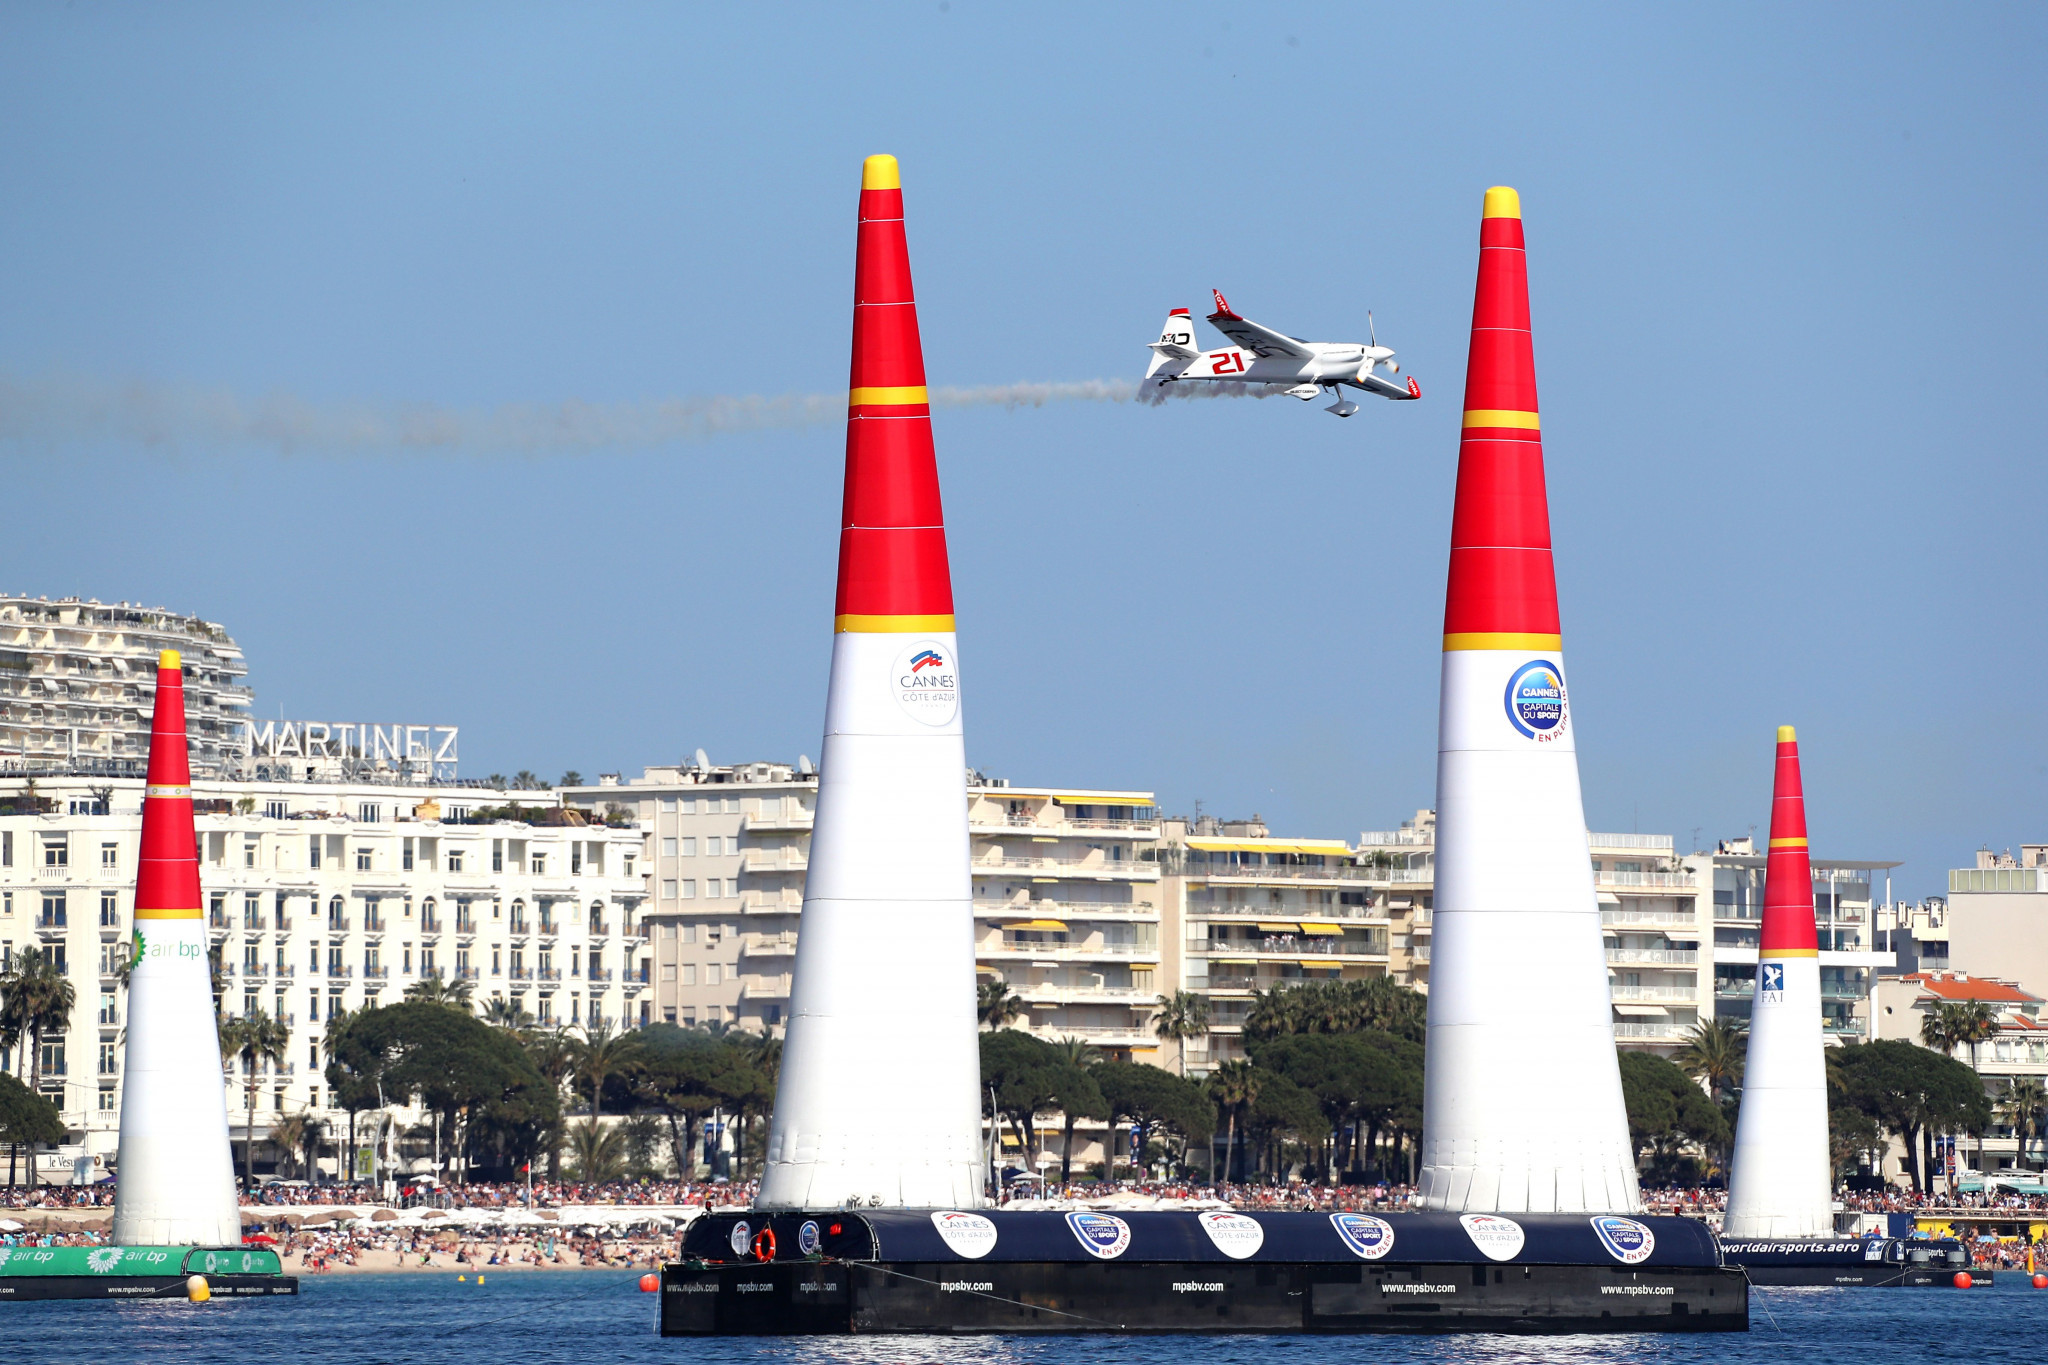 Hall wins first French leg of Red Bull Air Race World Championship